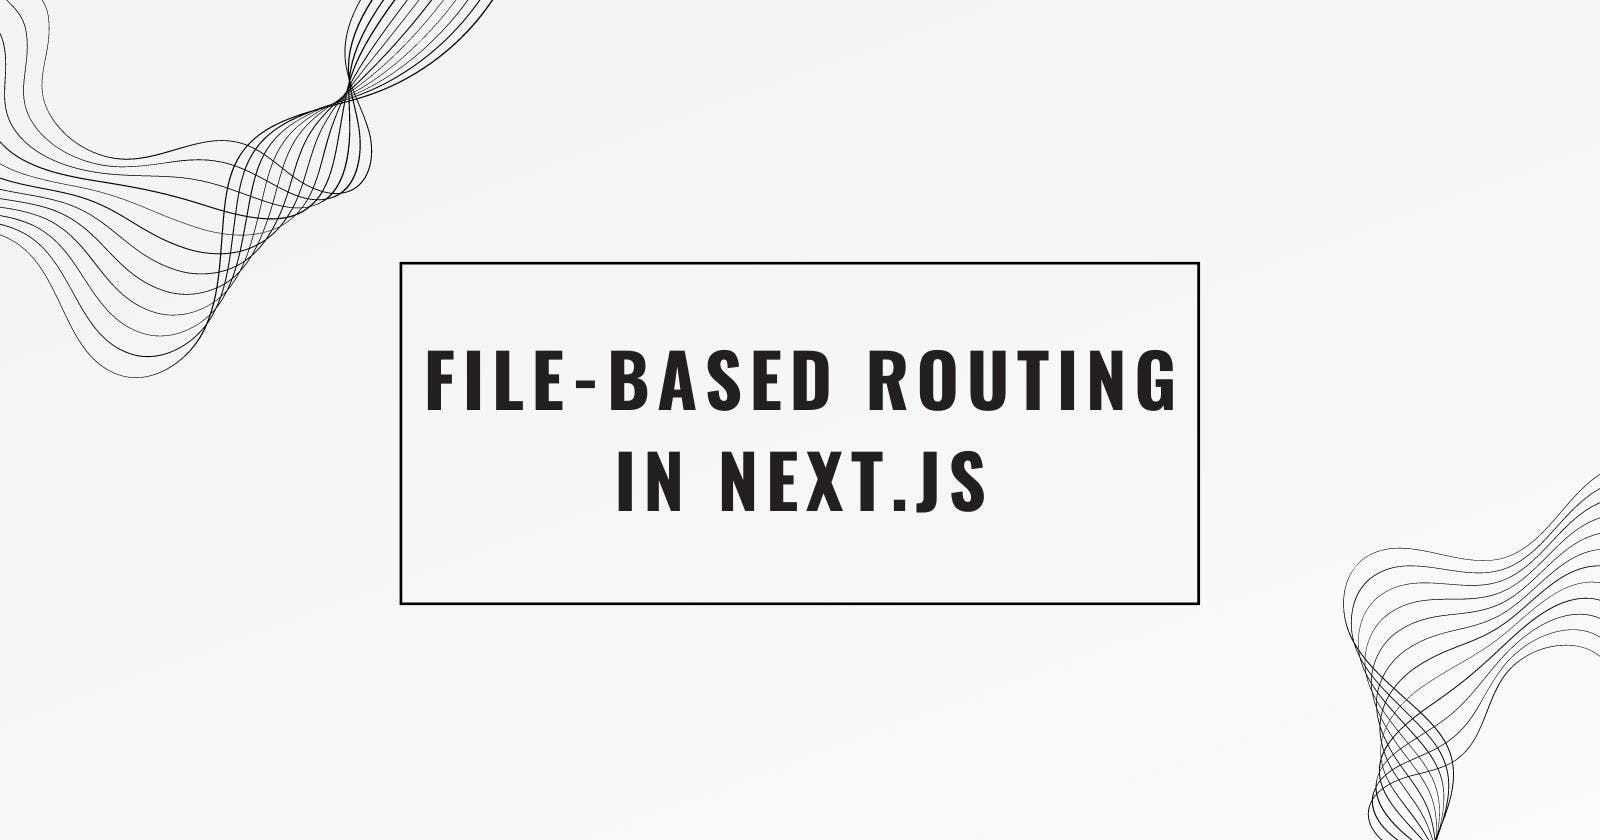 File-based routing in Next.js